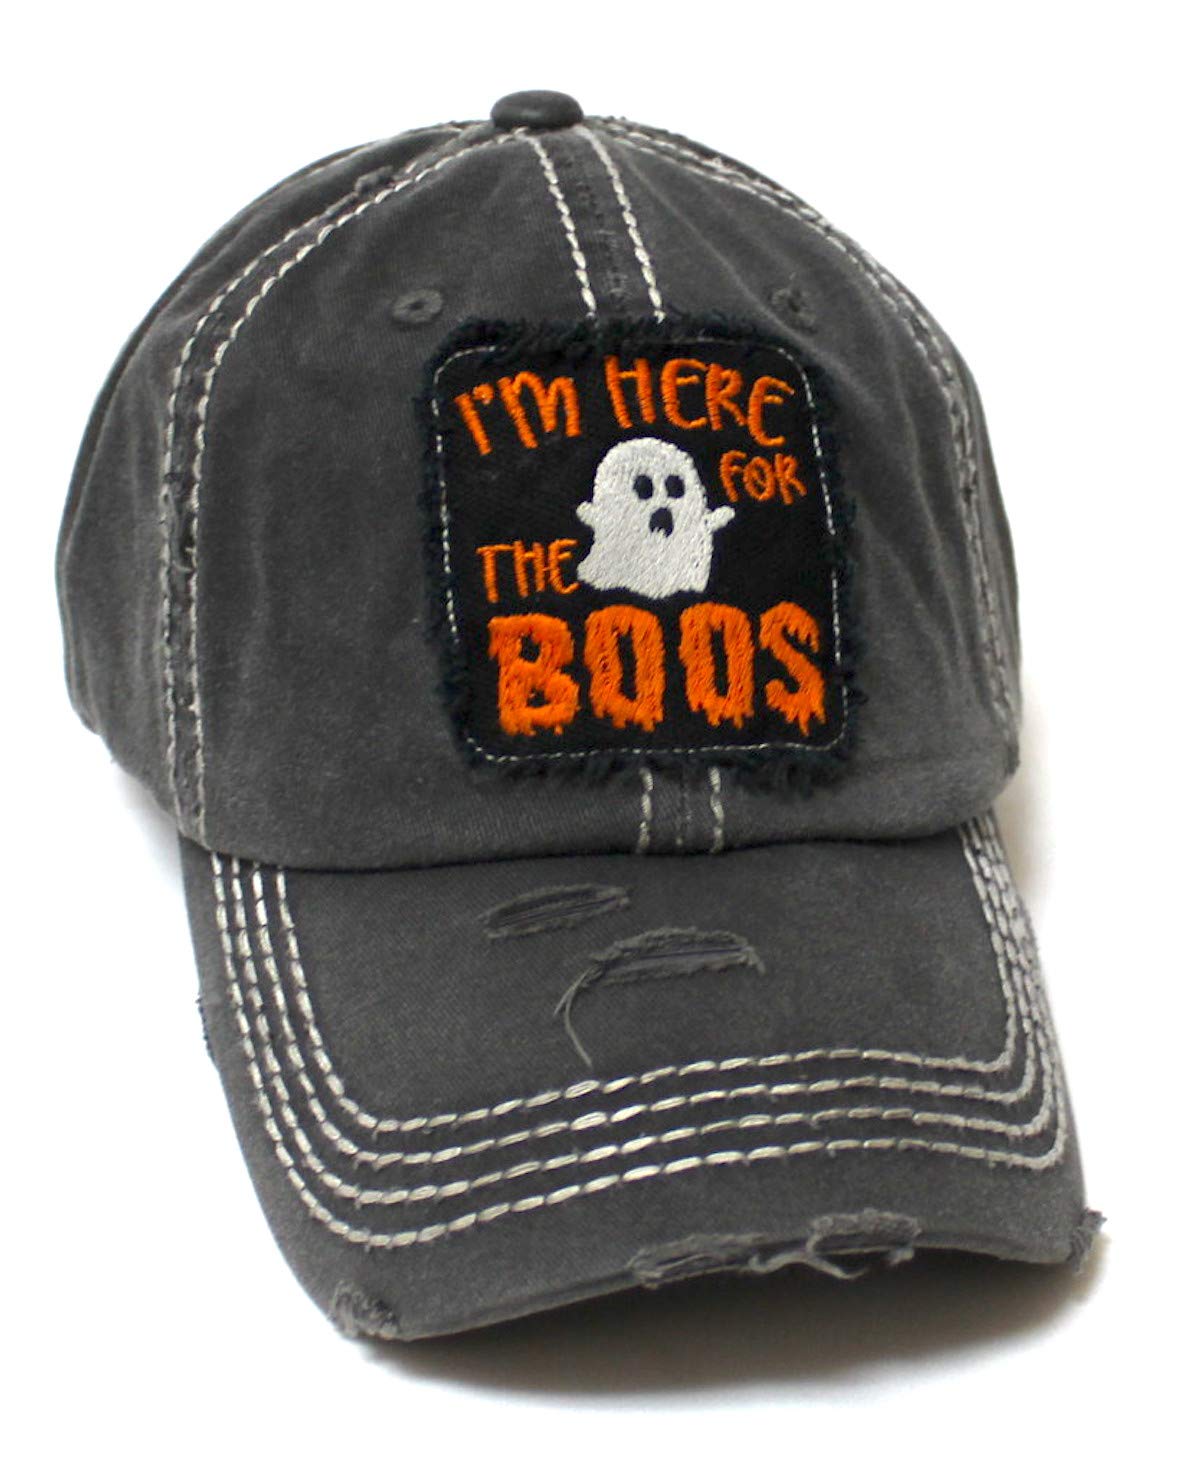 Women's Vintage Baseball Cap I'm Here for The Boos Halloween Spirit Patch Embroidery Hat, Pumpkin Graphite Black